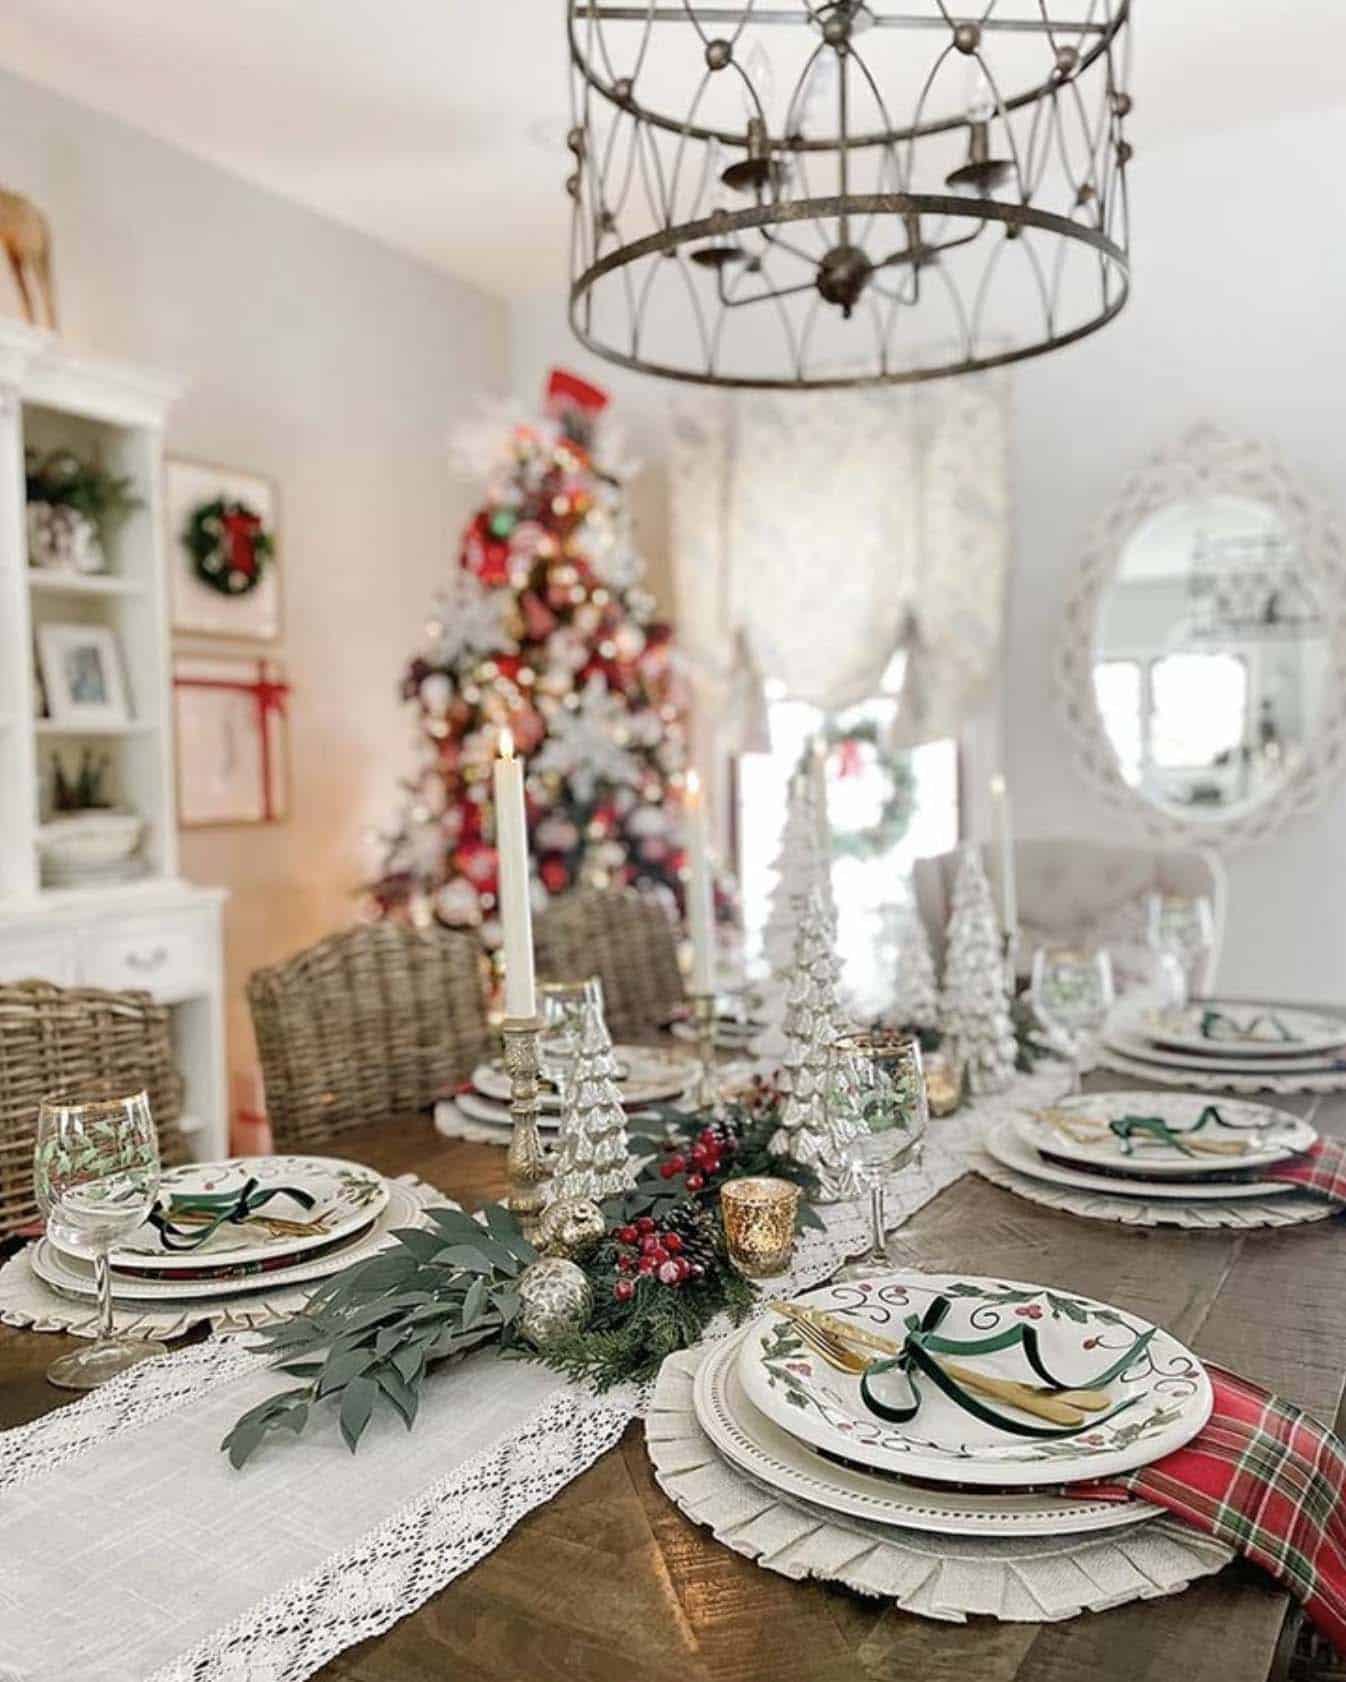 whimsical dining table with red and white Christmas decorations